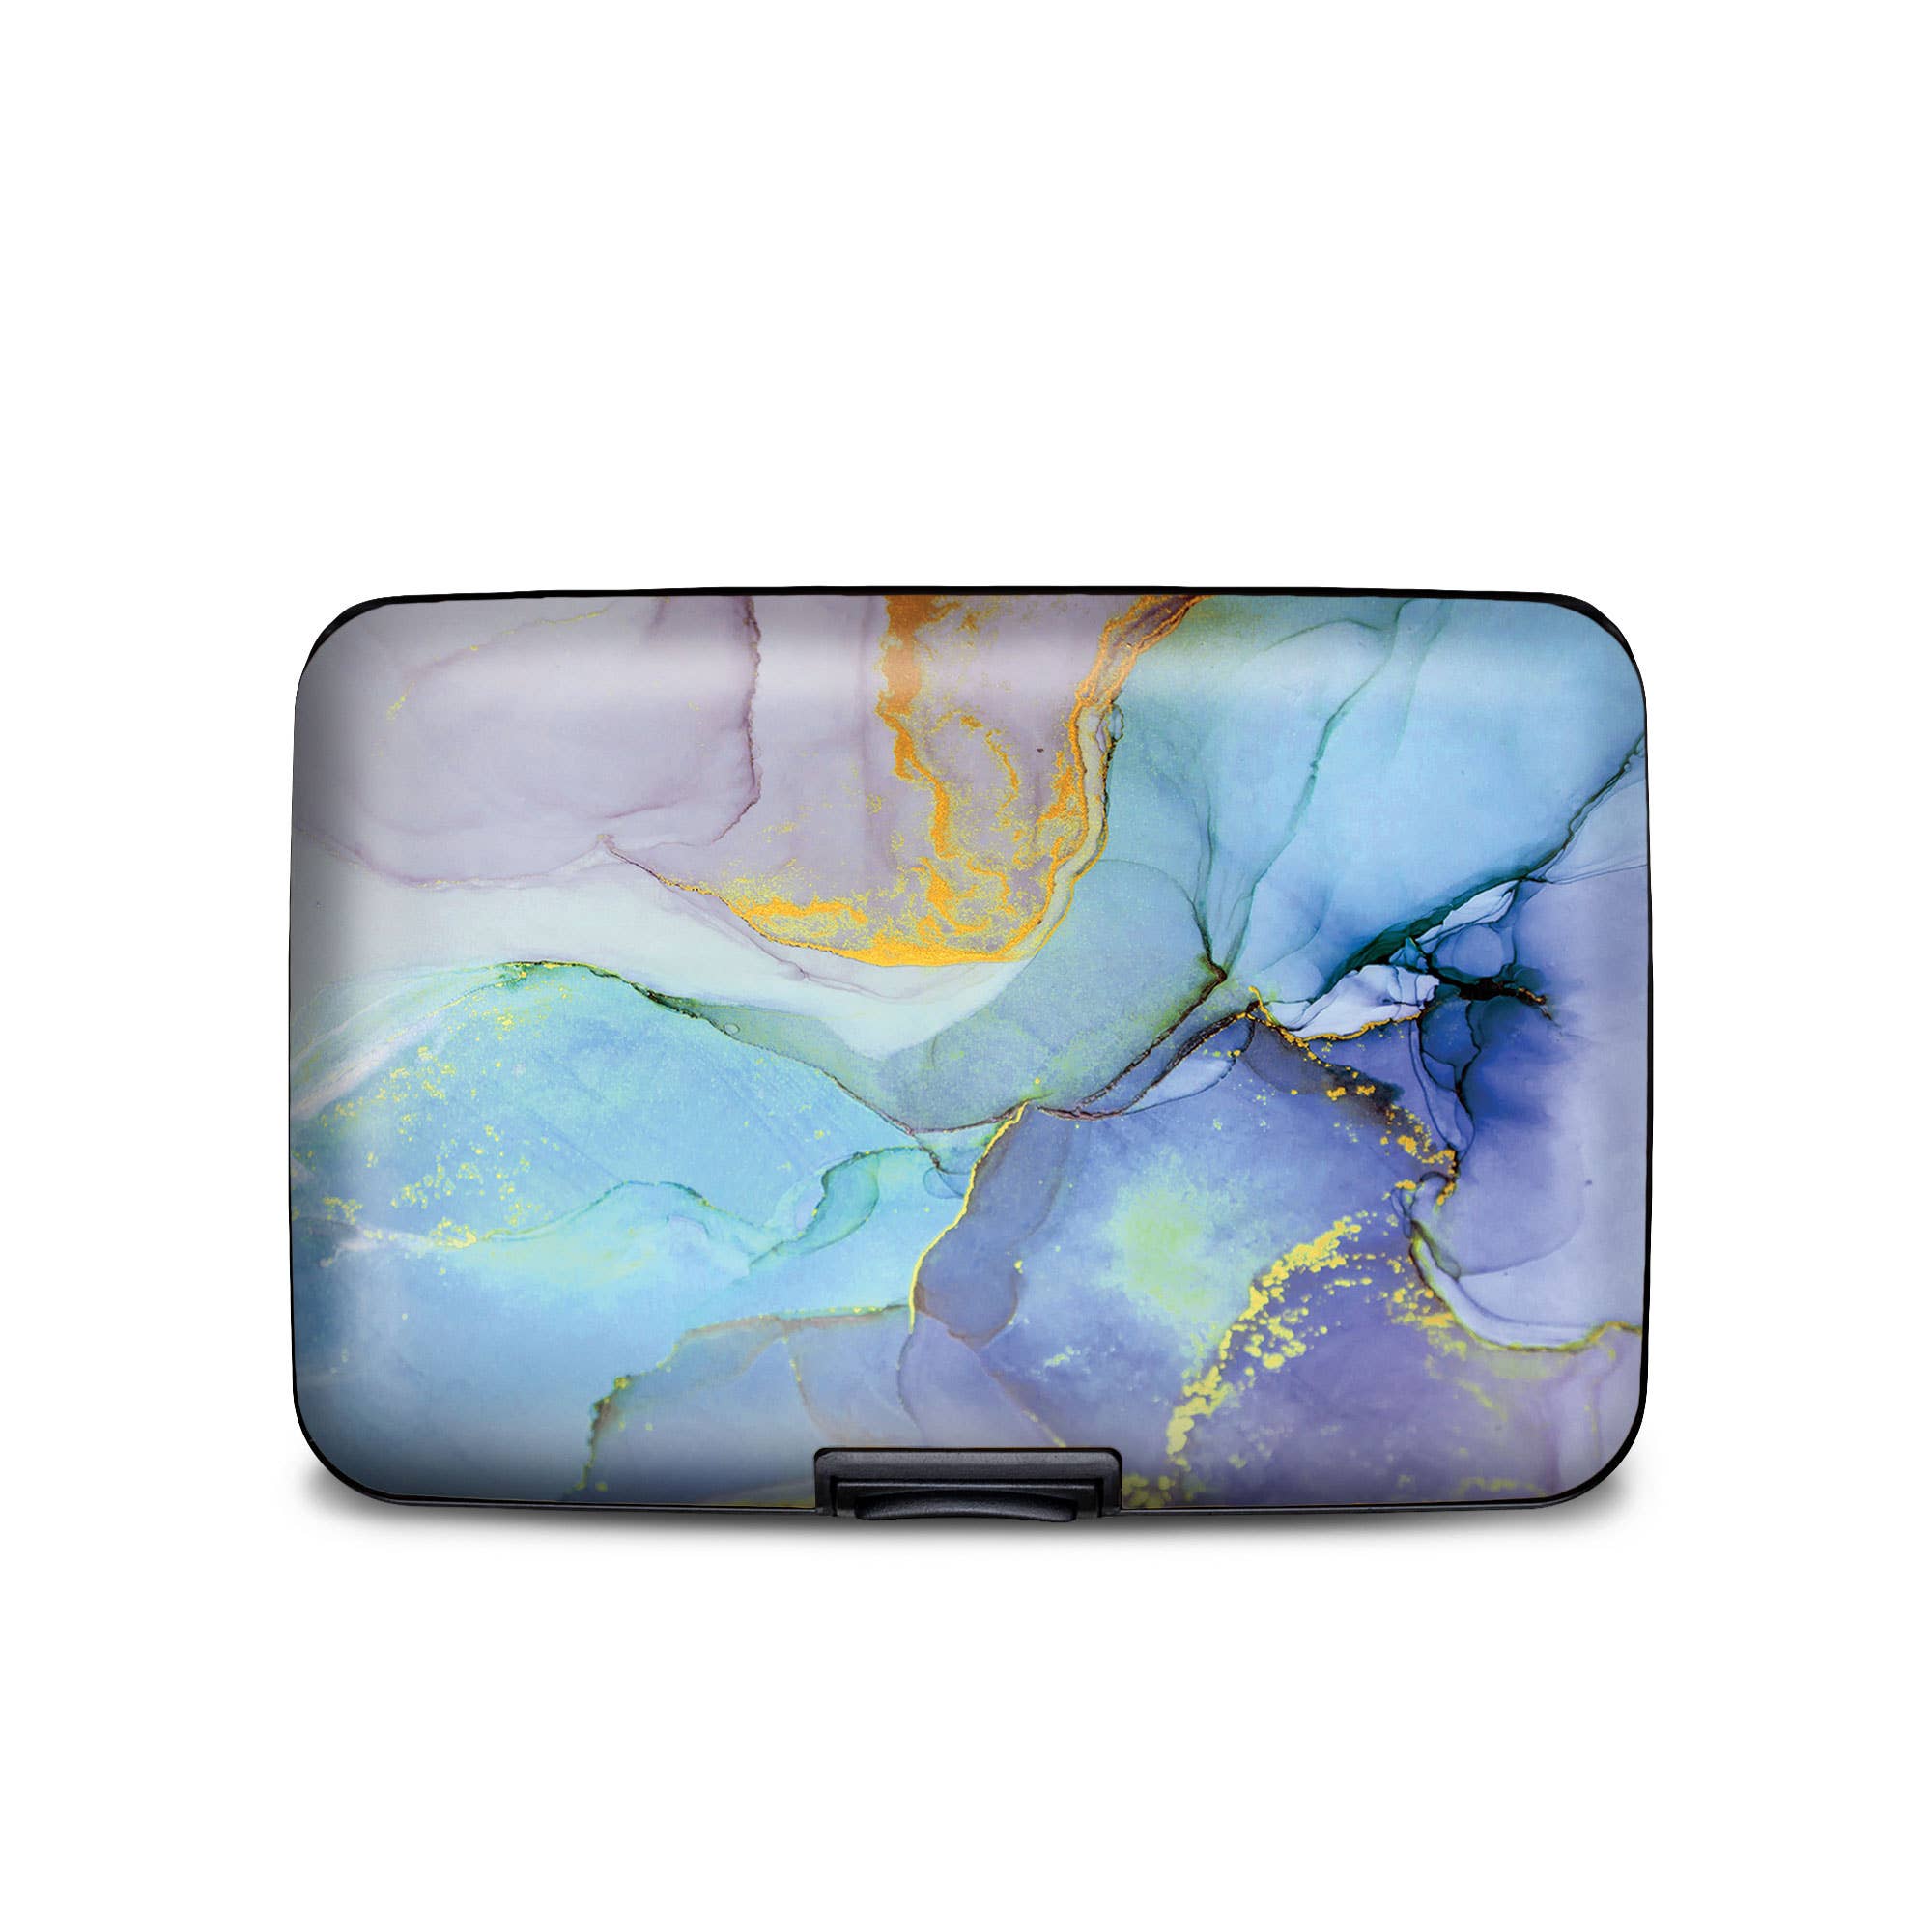 Blue Marble Armored Wallet